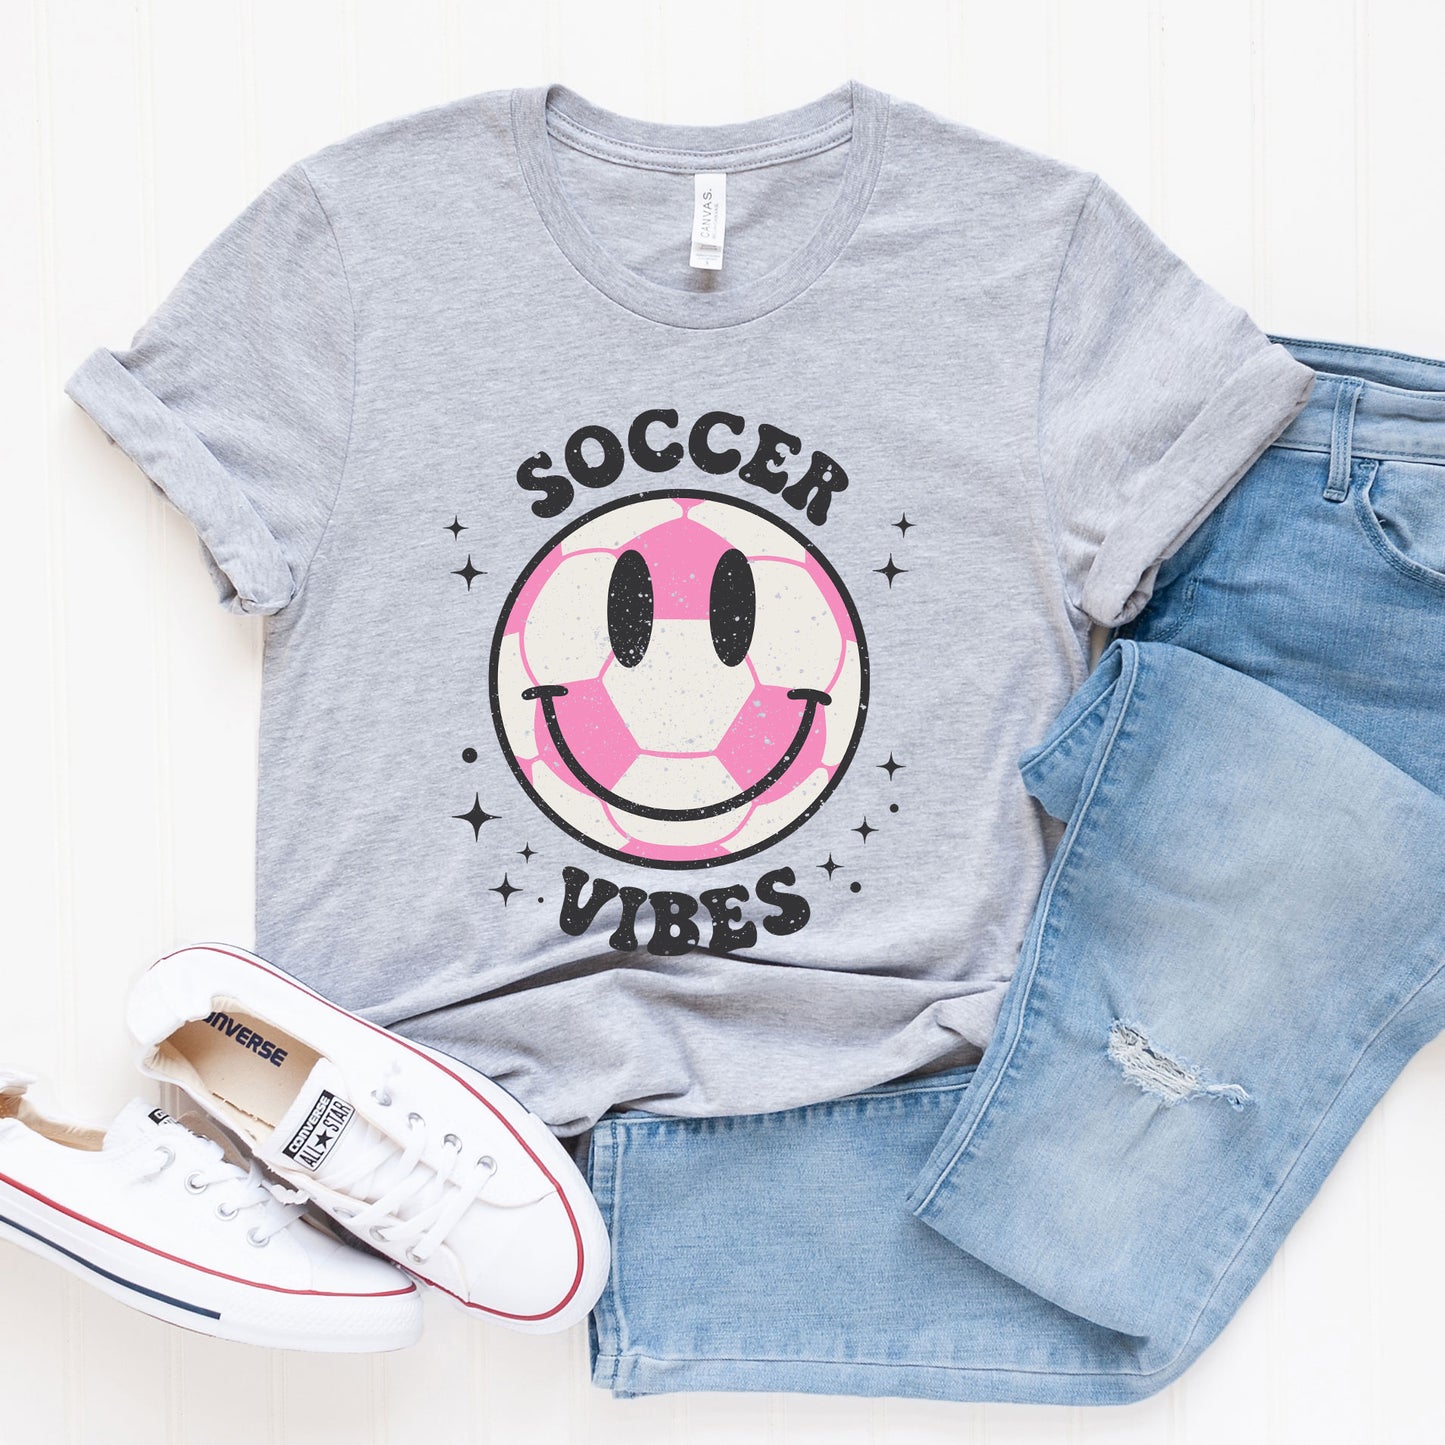 Vintage Pink Soccer Vibes Smiley Face | Short Sleeve Graphic Tee